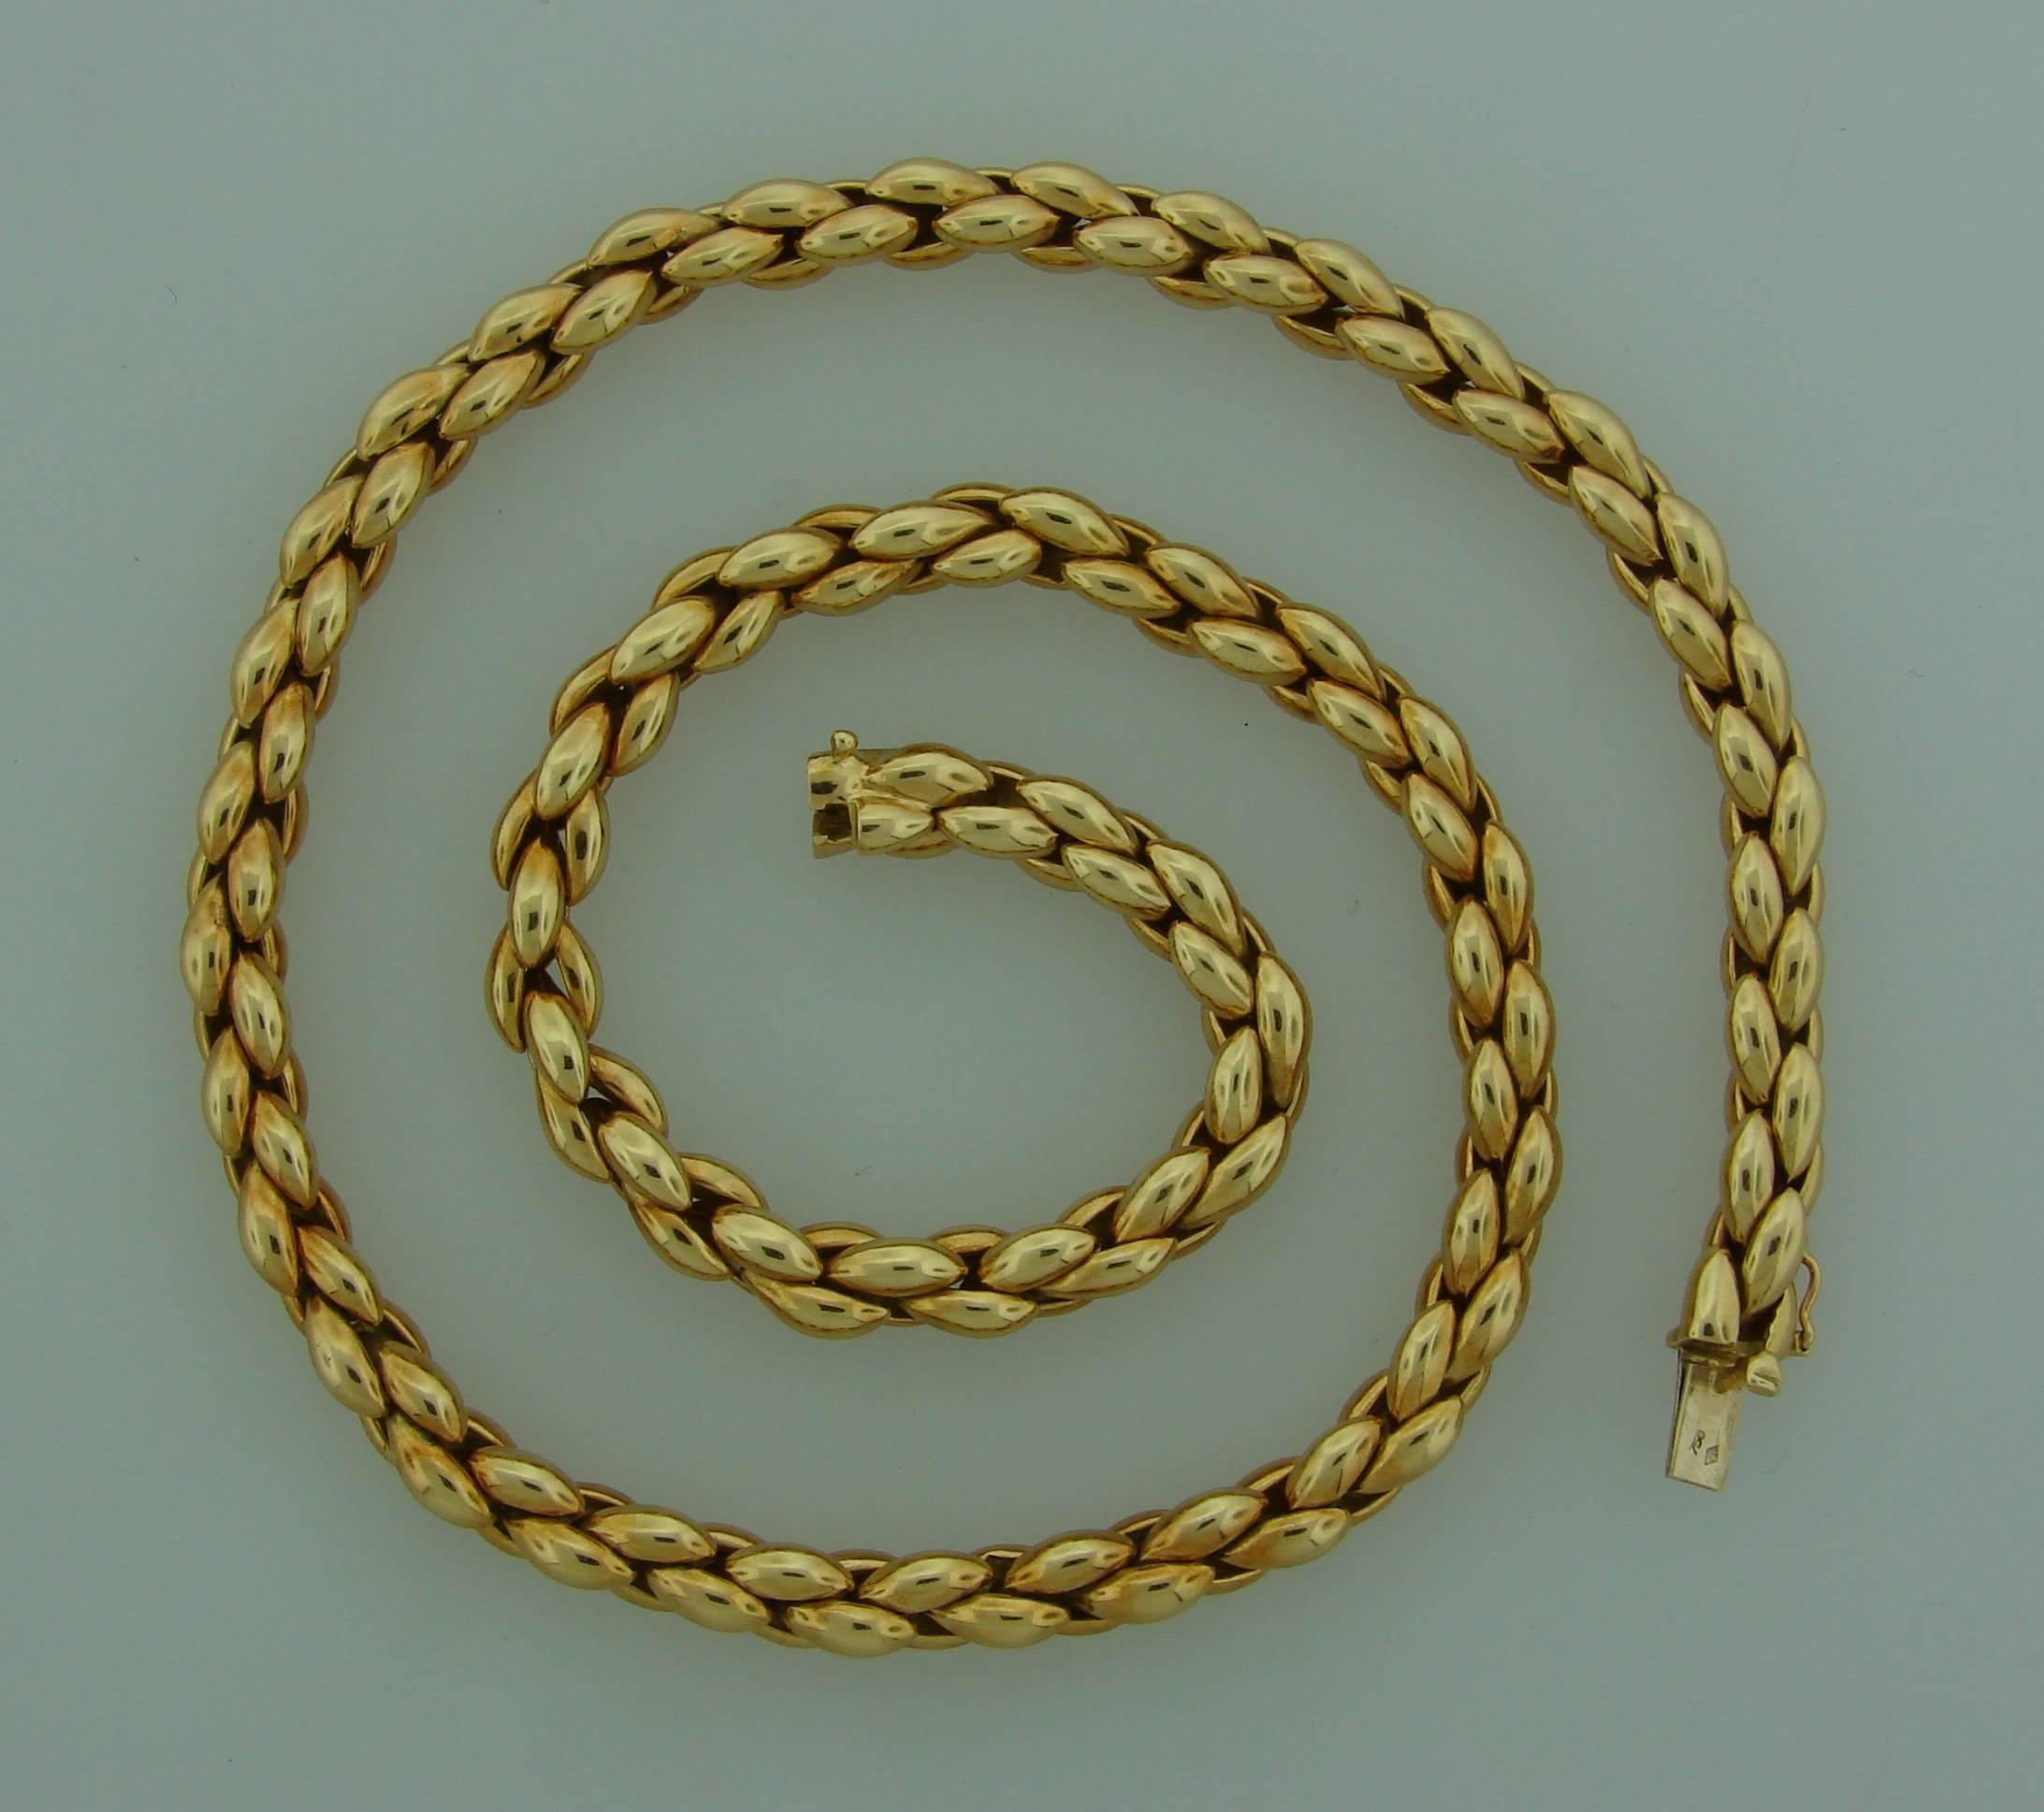 Elegant, smooth and wearable chain necklace that is a great addition to your jewelry collection. It was created by Cartier in 1993. 
The necklace is made of 18 karat yellow gold. 
It is 17 inches (42.5 cm) long and slightly under 1/4 of an inch